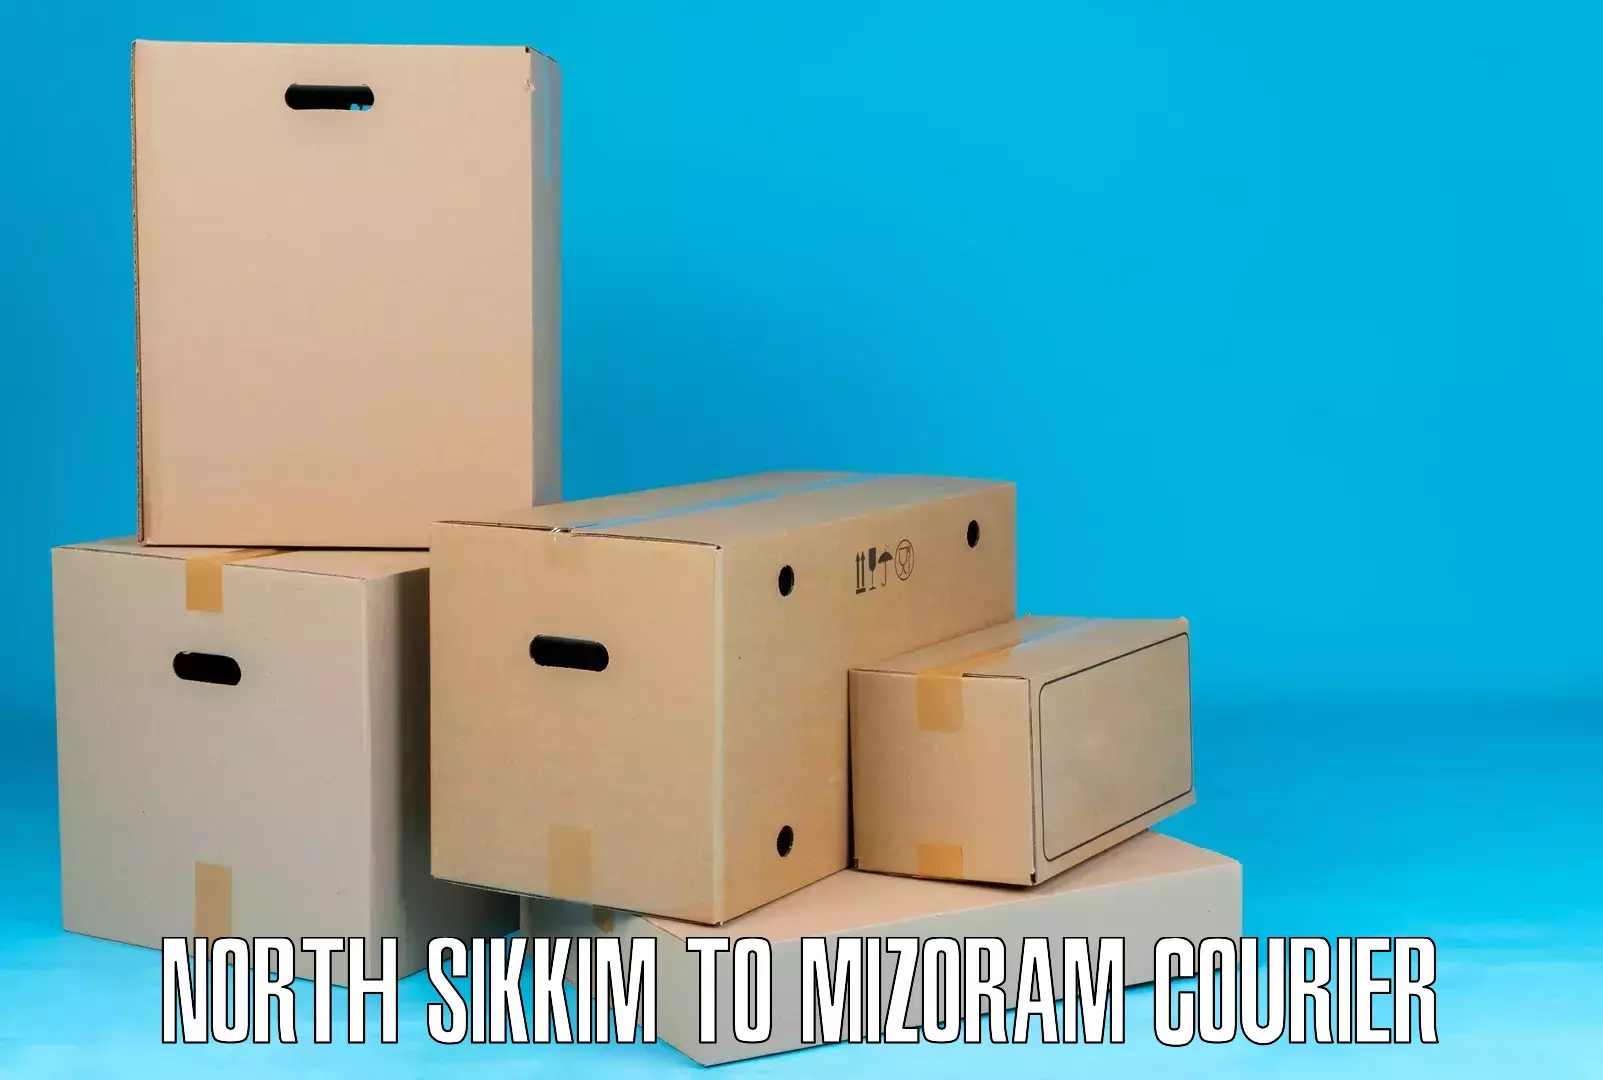 Professional courier handling North Sikkim to Lunglei